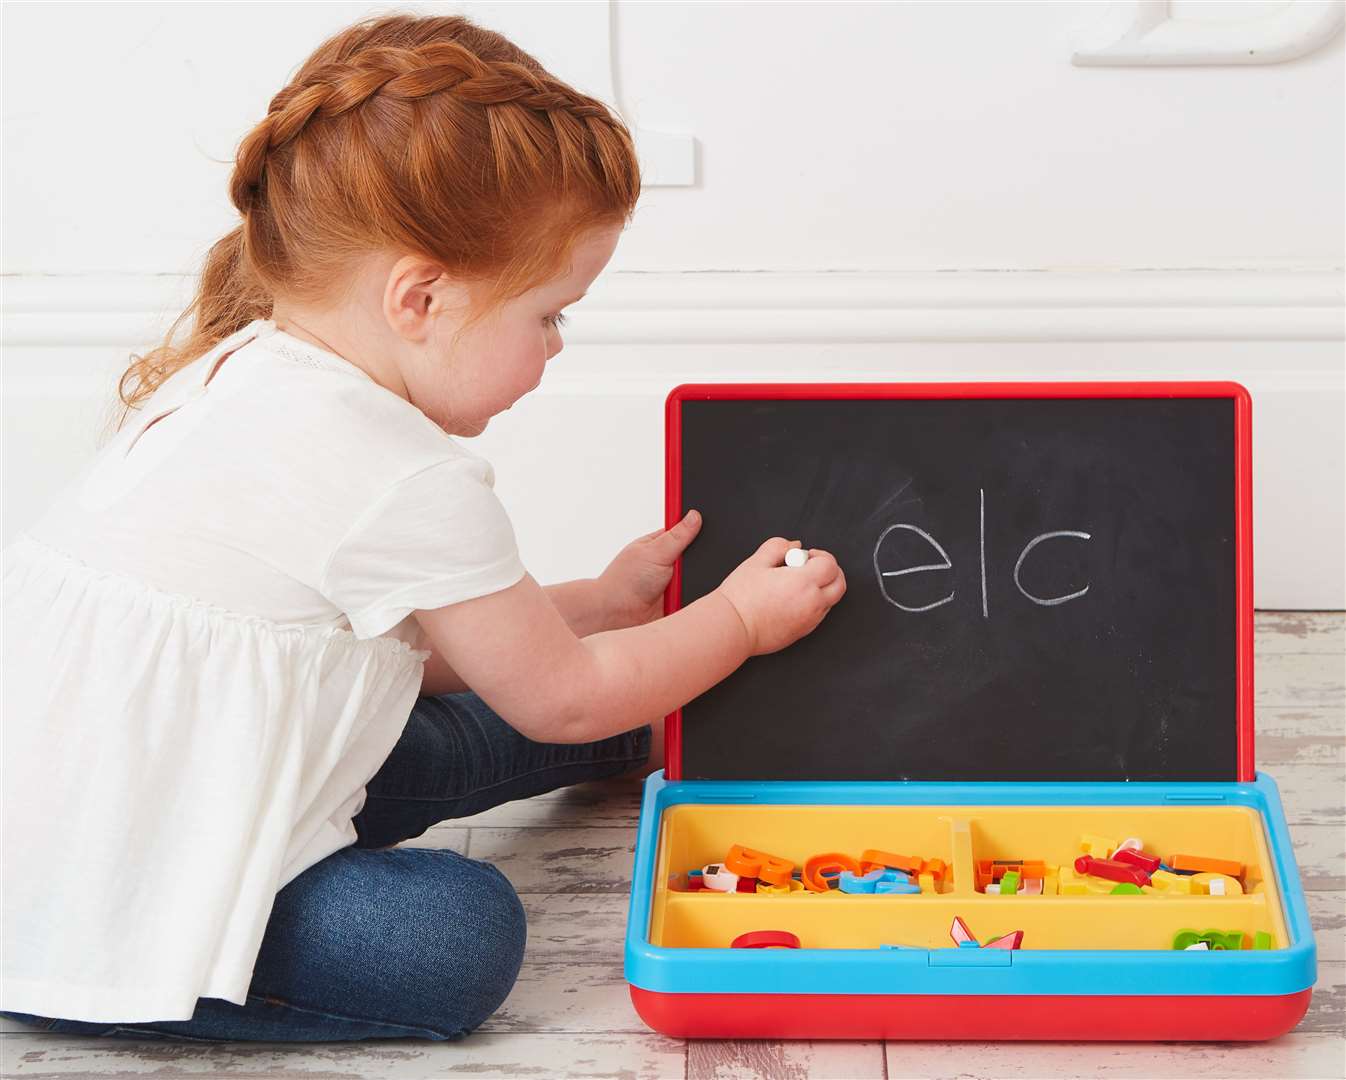 There are discounts parents can claim for toys to help learning at home